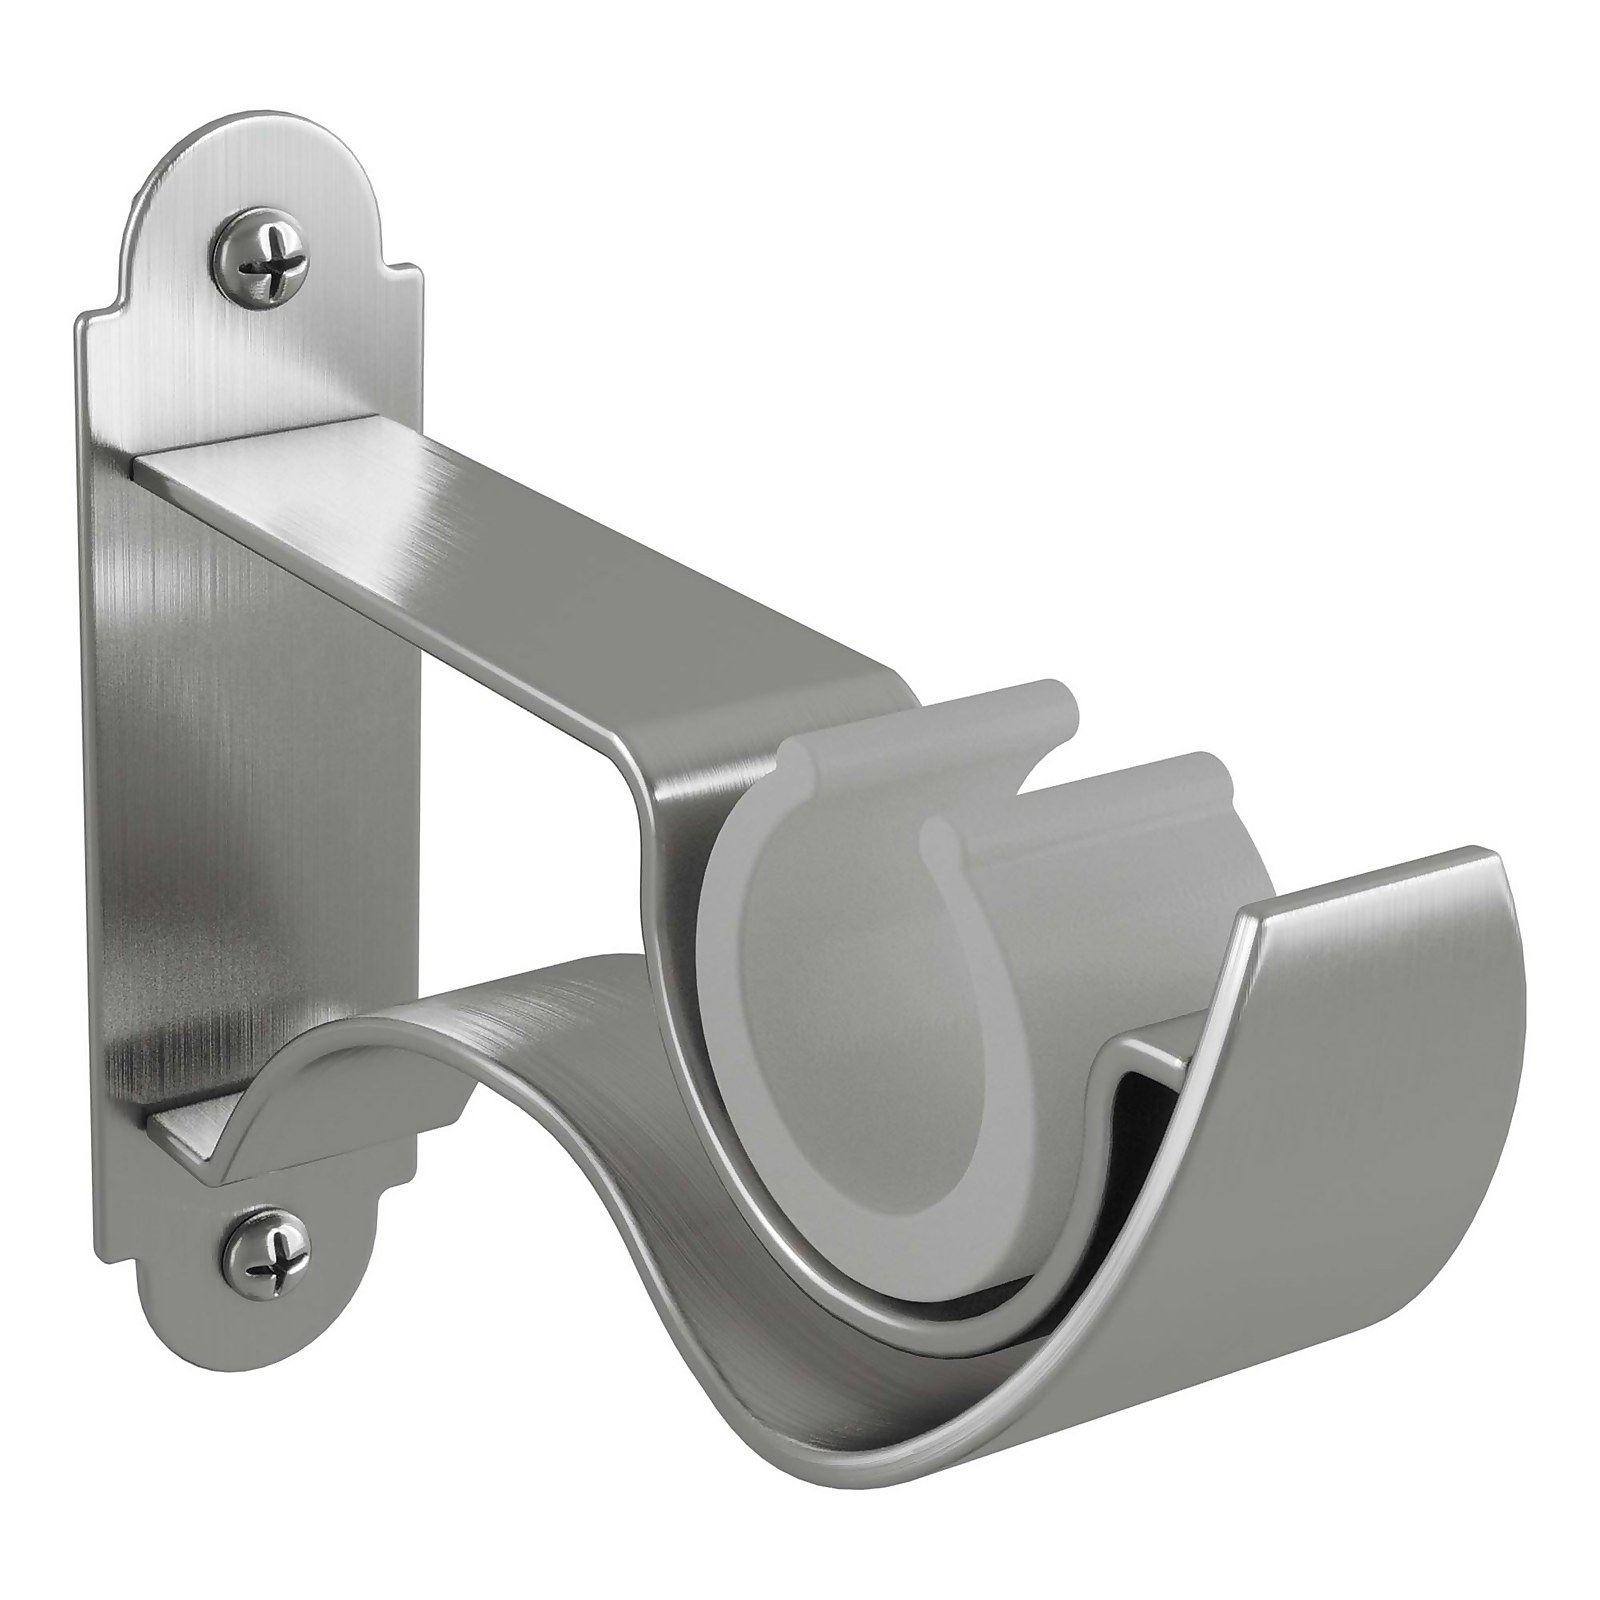 Photo of Push Fit Curatin Bracket Brushed Silver